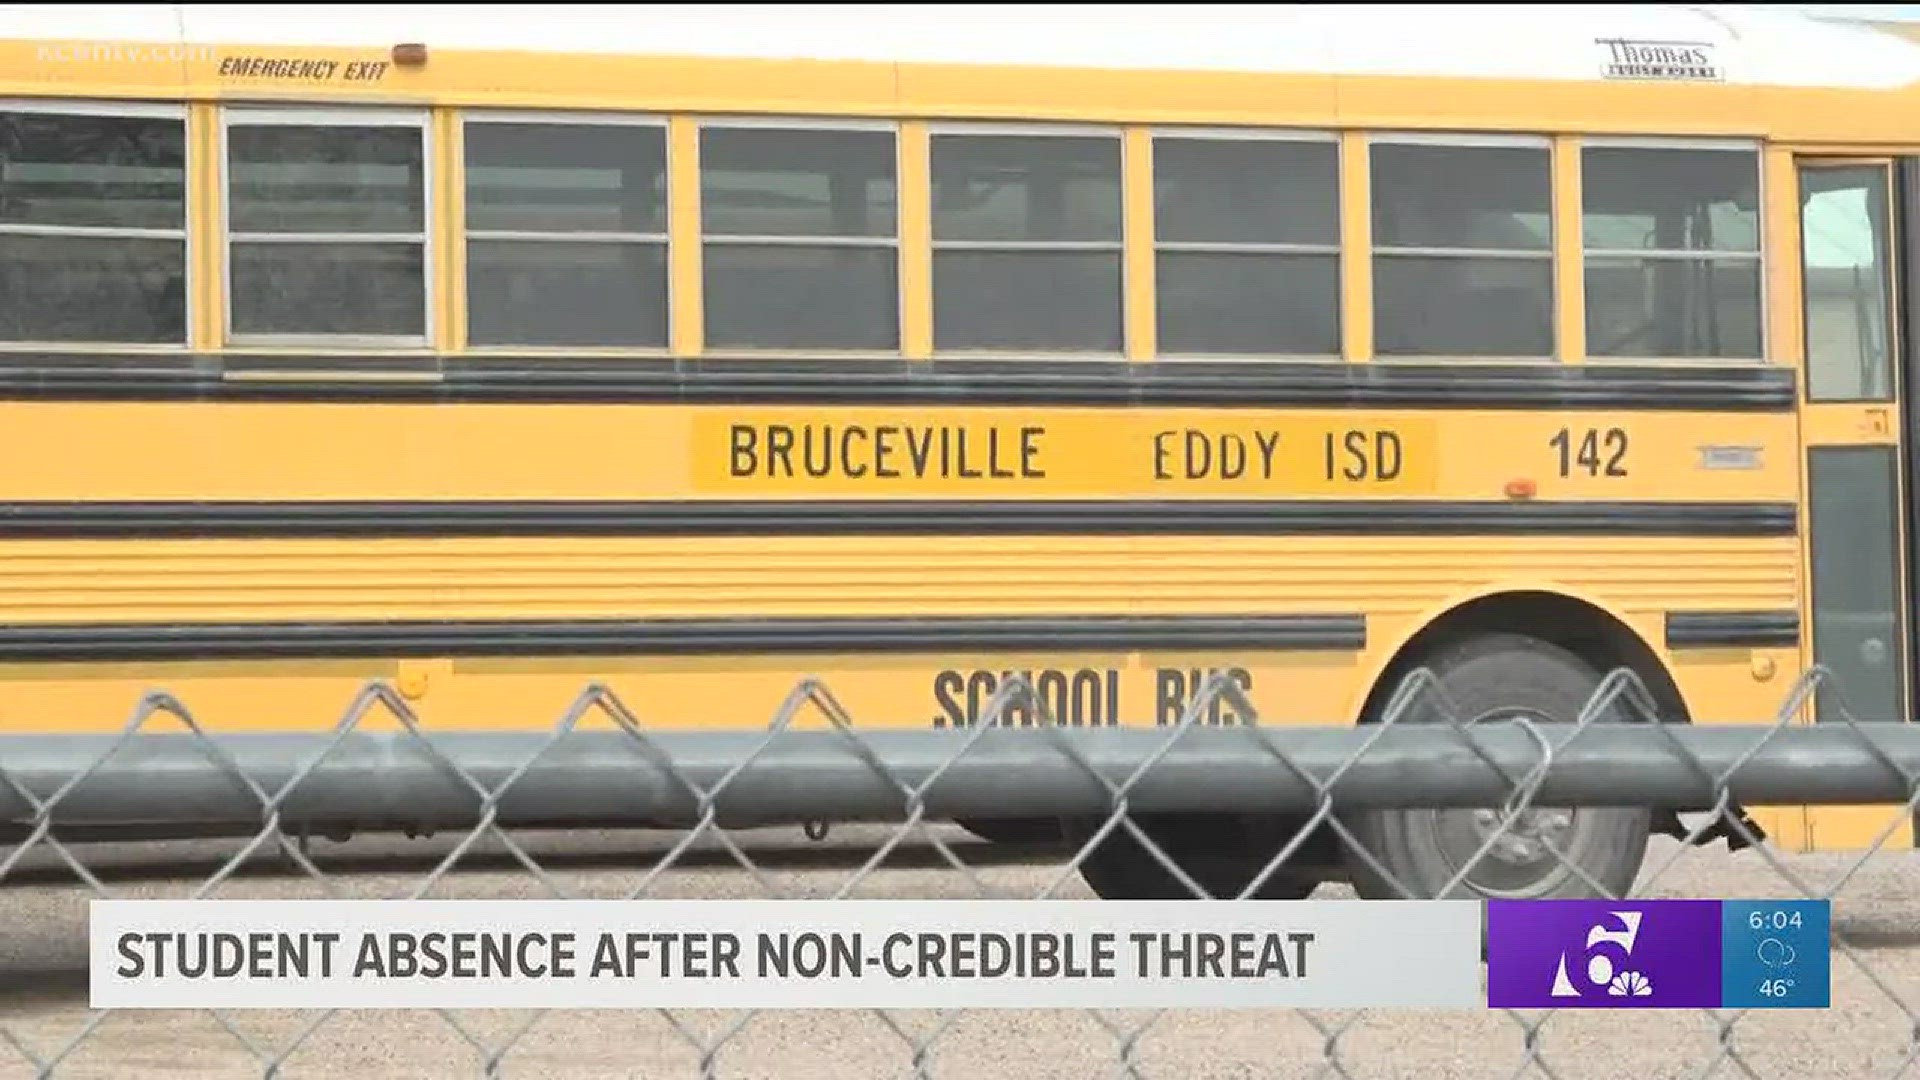 BrucevilleEddy ISD continues safety precautions after rumor of threat